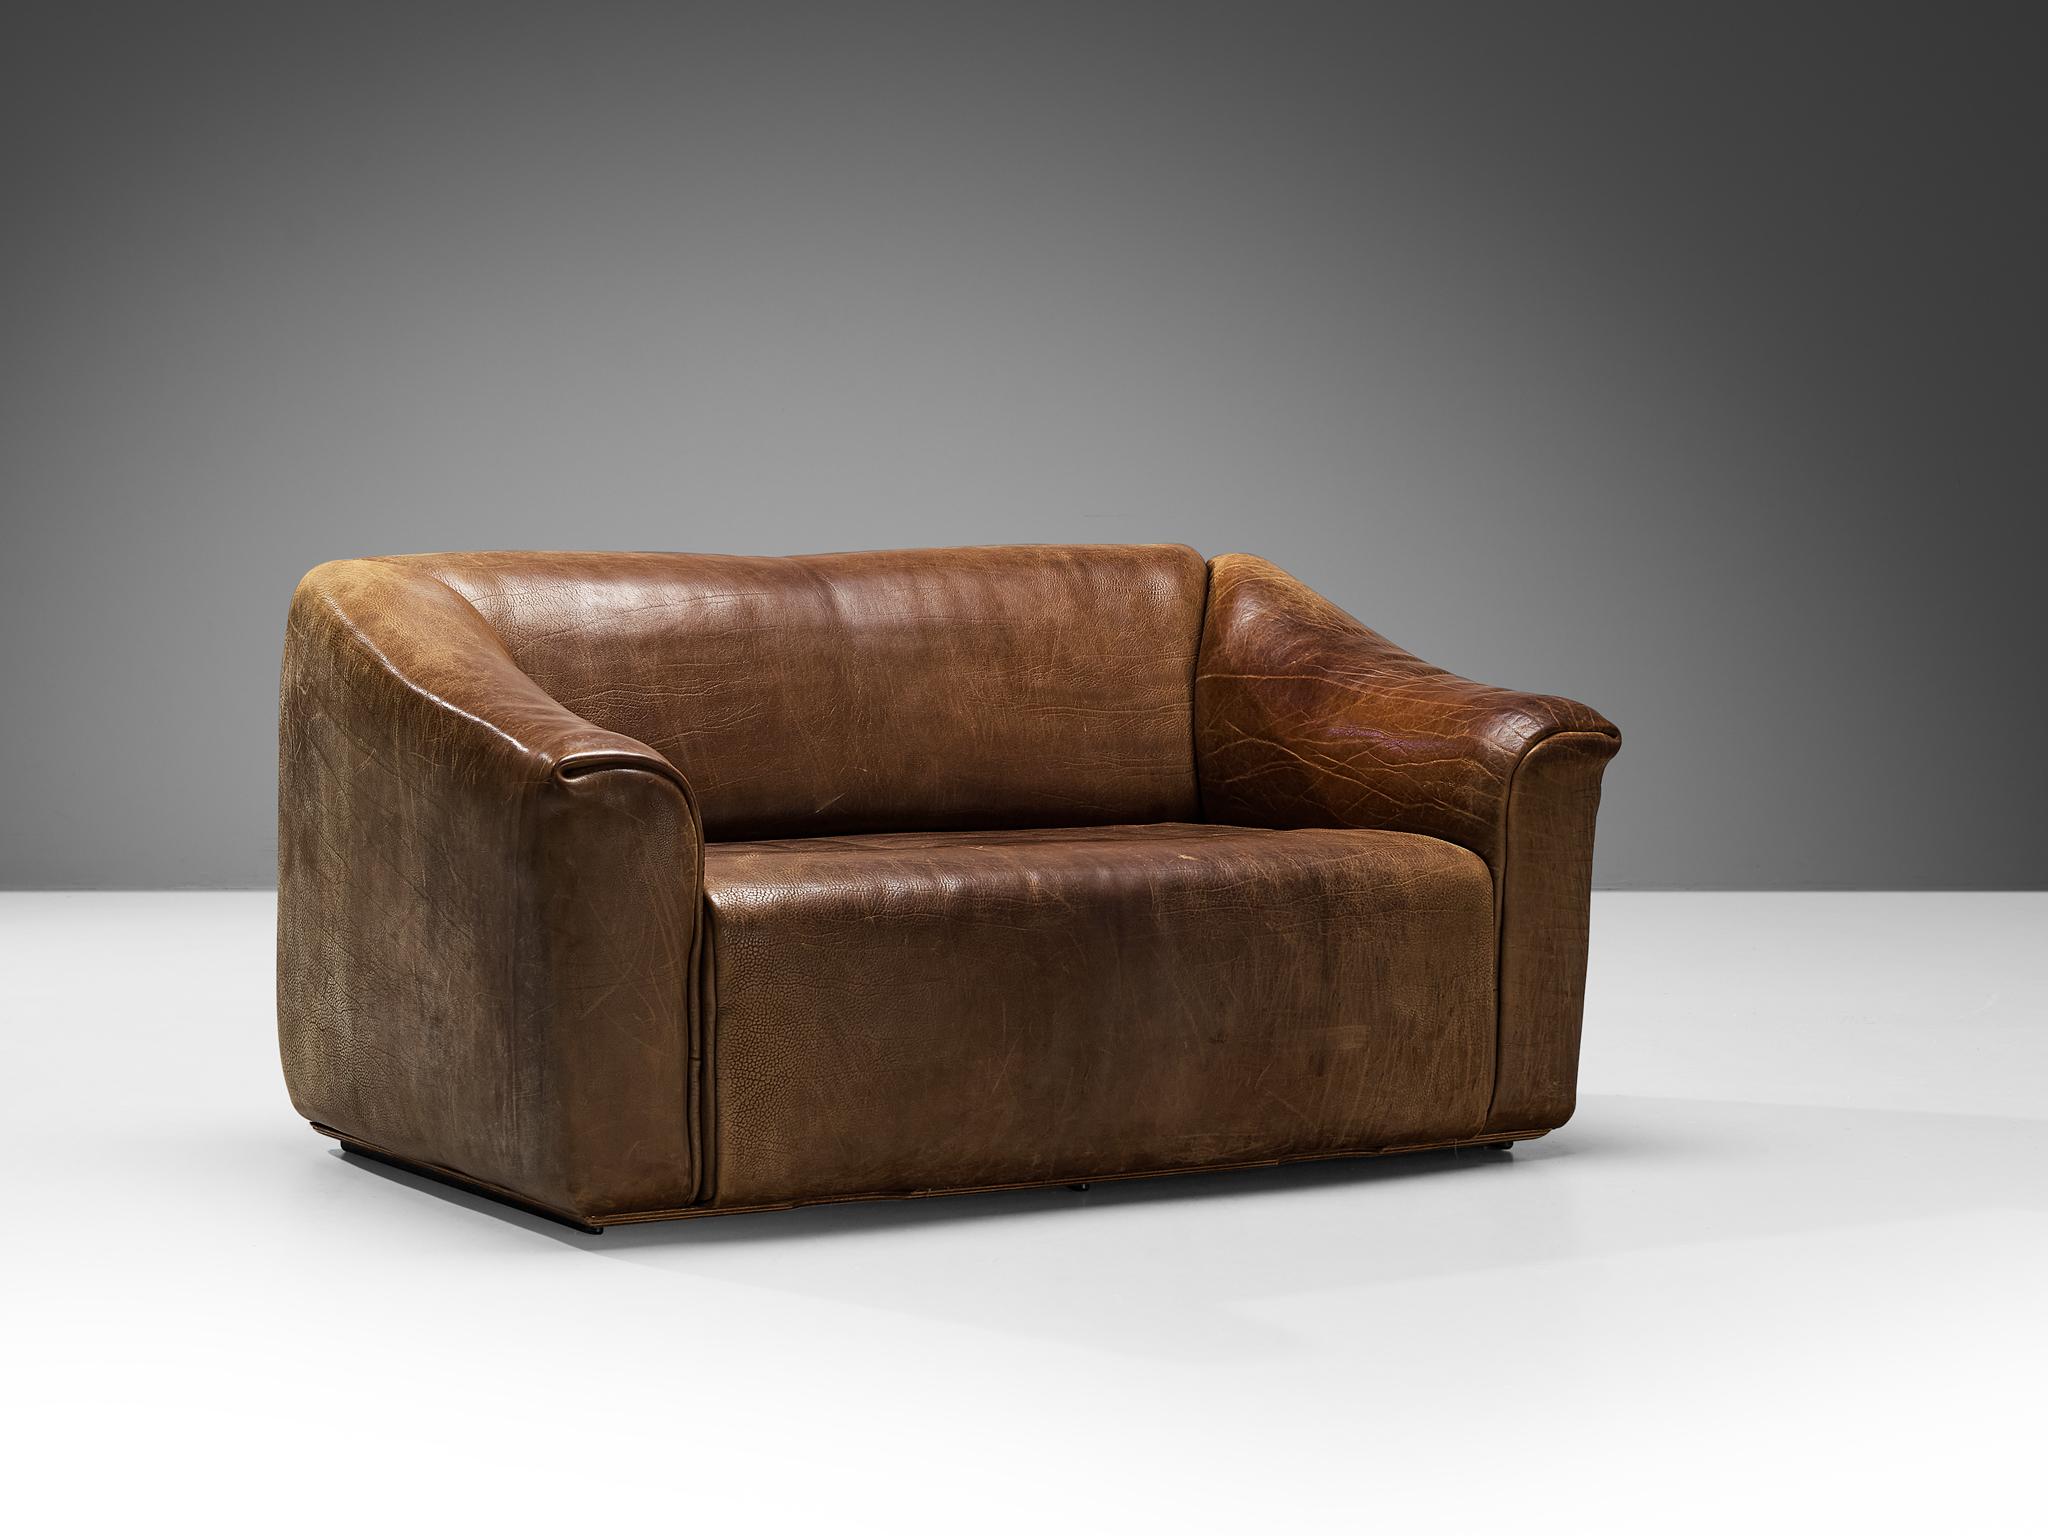 Swiss De Sede 'DS-47 'Two Seat Sofa in Cognac Leather For Sale